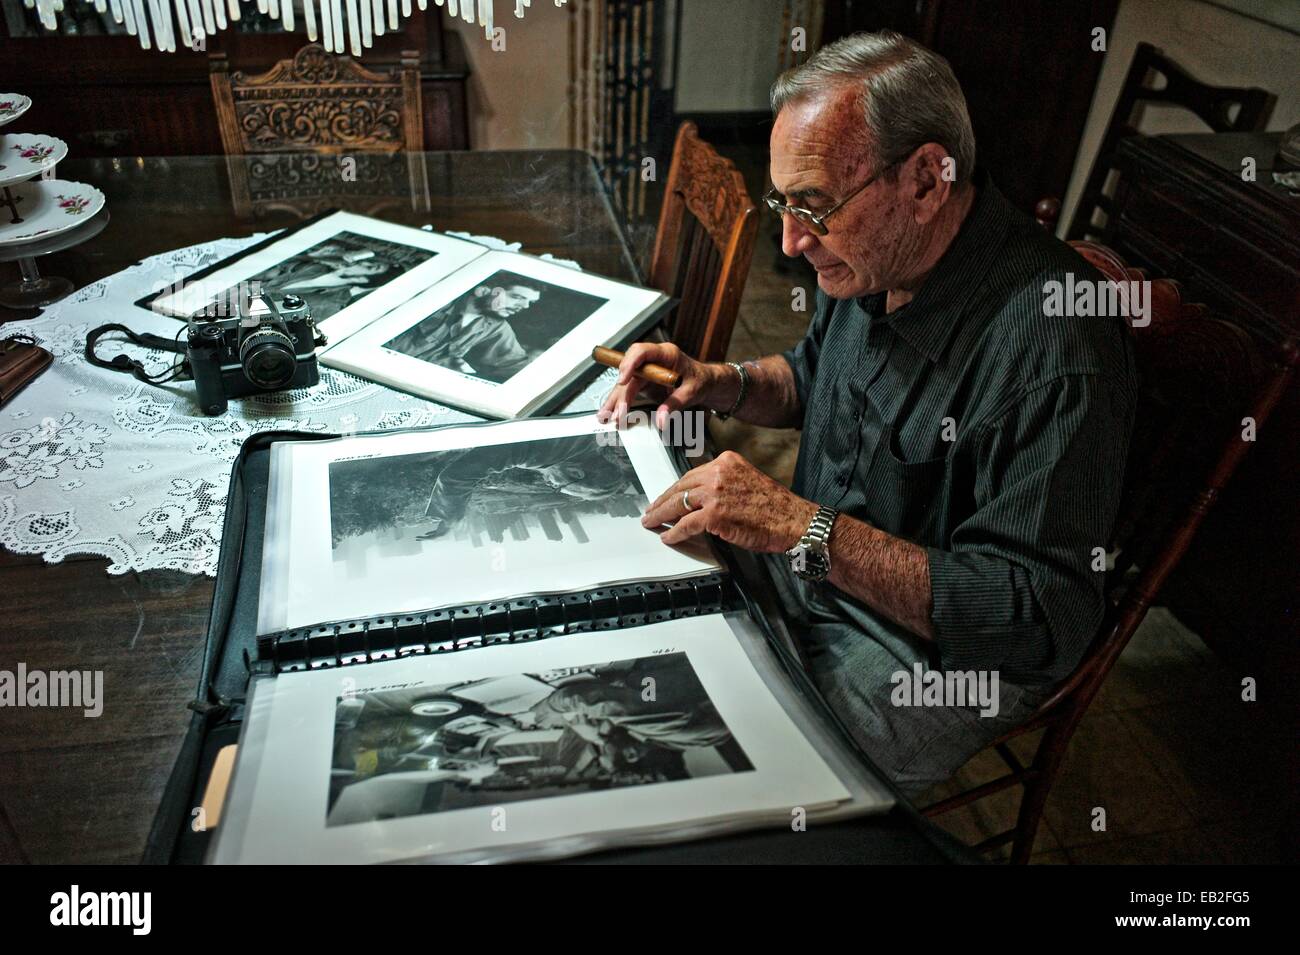 Cuban photographer Liborio Noval, born in 1936, and one of the most iconic photographer of the Cuban Revolution, at his home in Havana. He died in 2012. Stock Photo